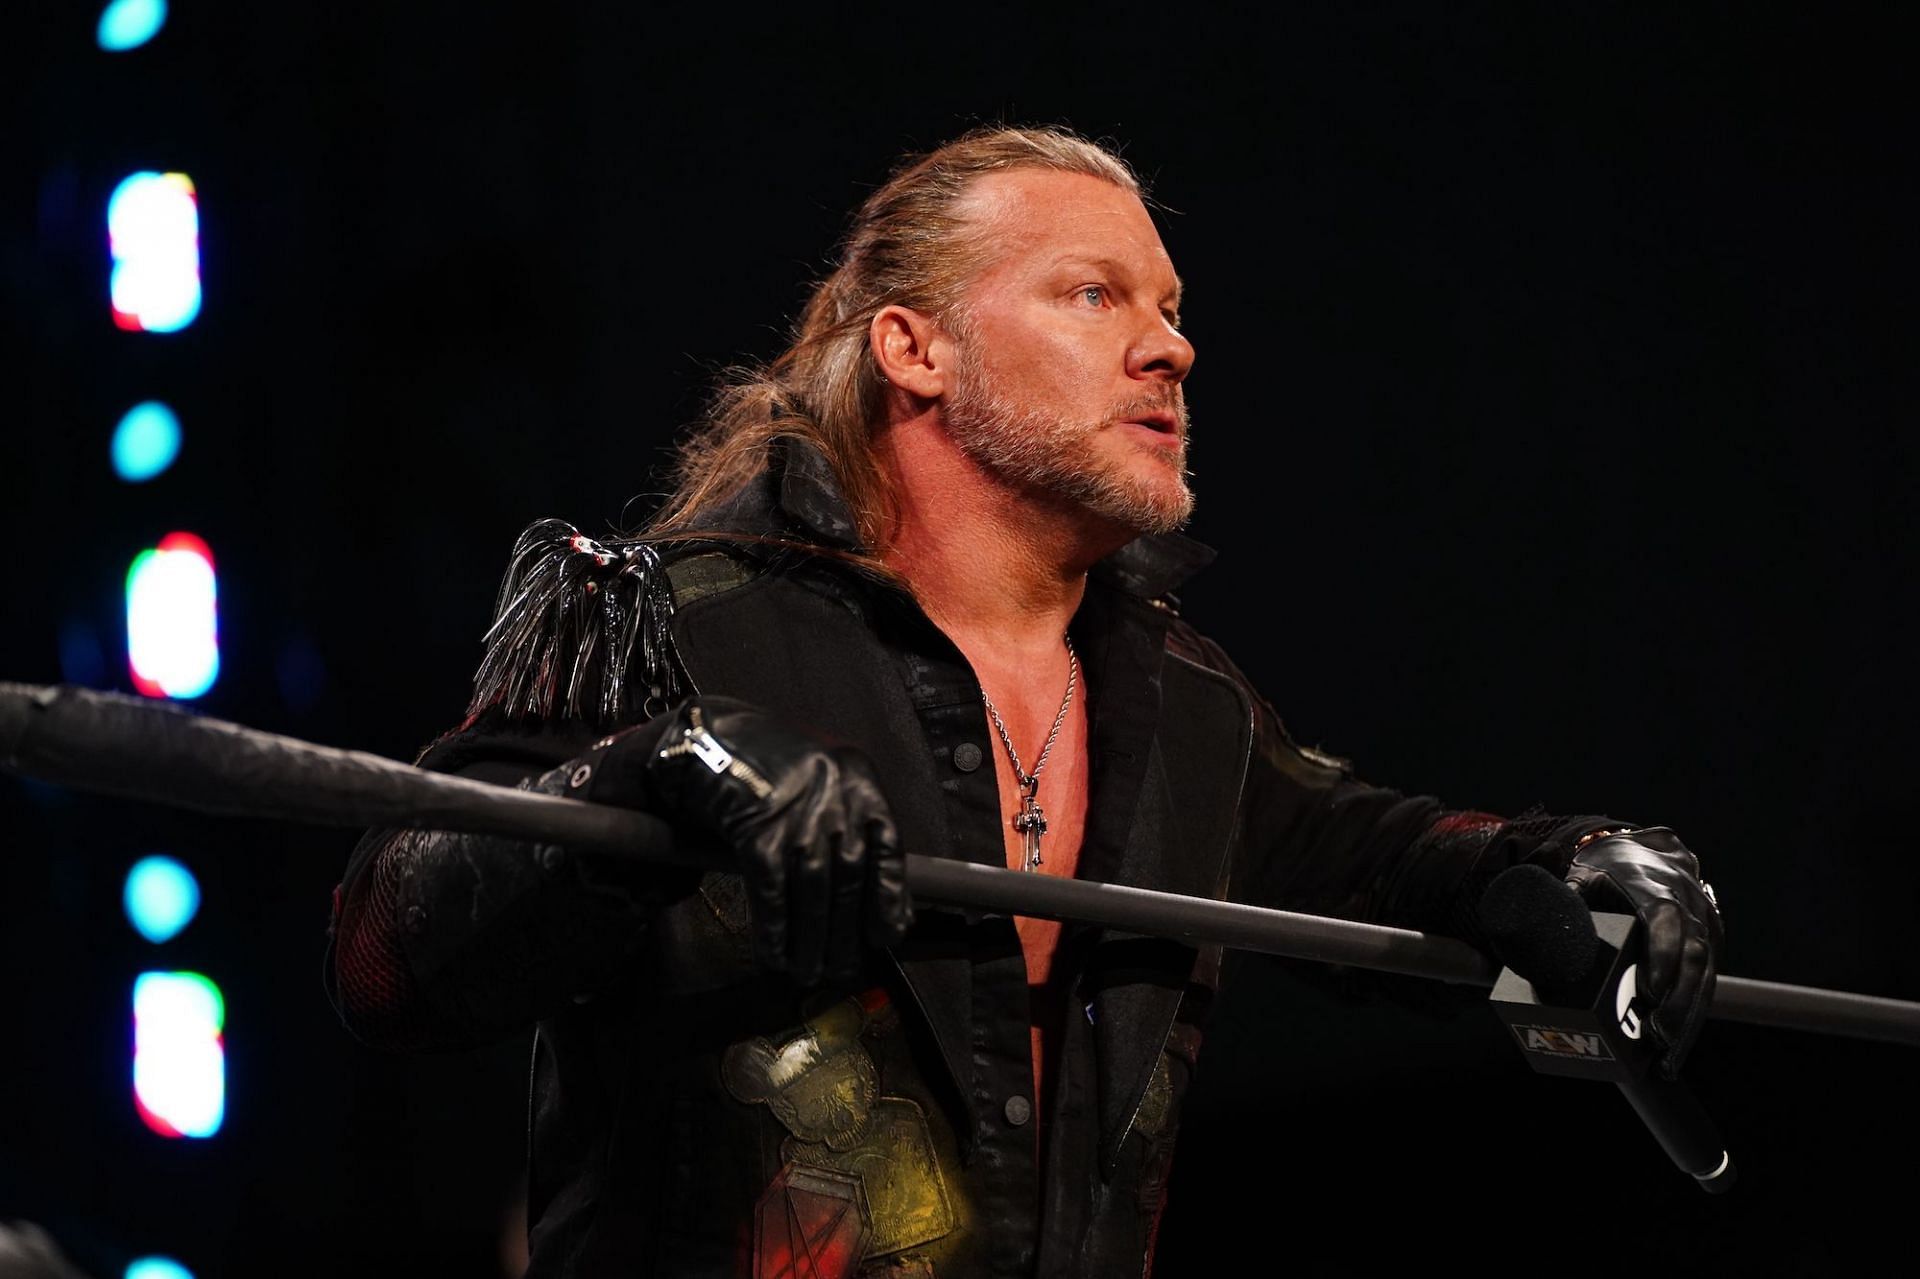 The former WWE Champion put up a blistering performance at Revolution 2022.